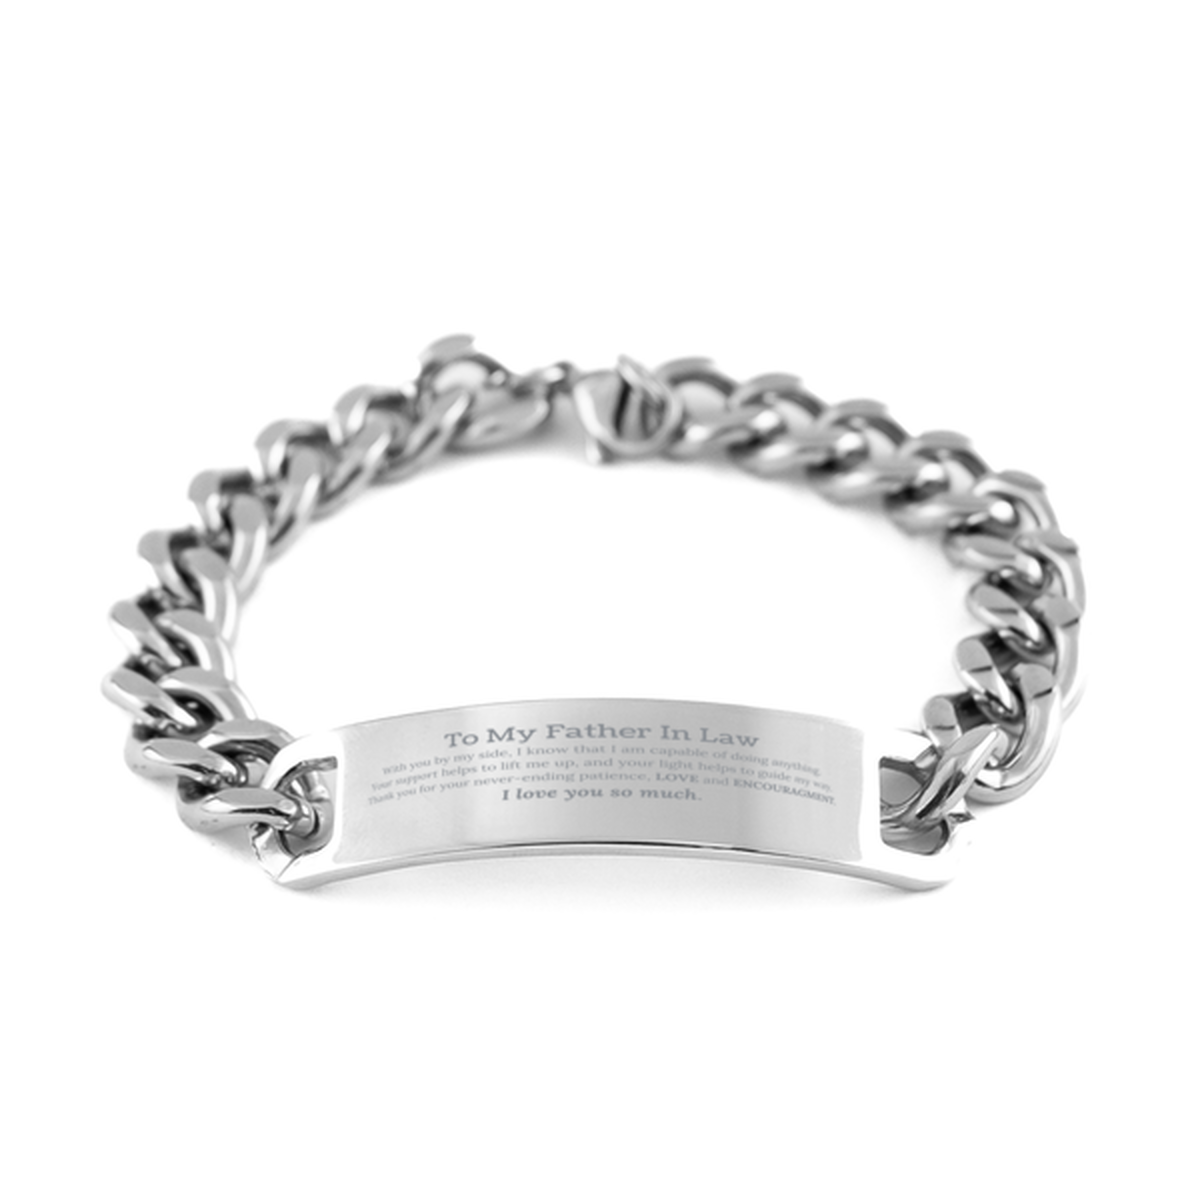 Appreciation Father In Law Cuban Chain Stainless Steel Bracelet Gifts, To My Father In Law Birthday Christmas Wedding Keepsake Gifts for Father In Law With you by my side, I know that I am capable of doing anything. I love you so much